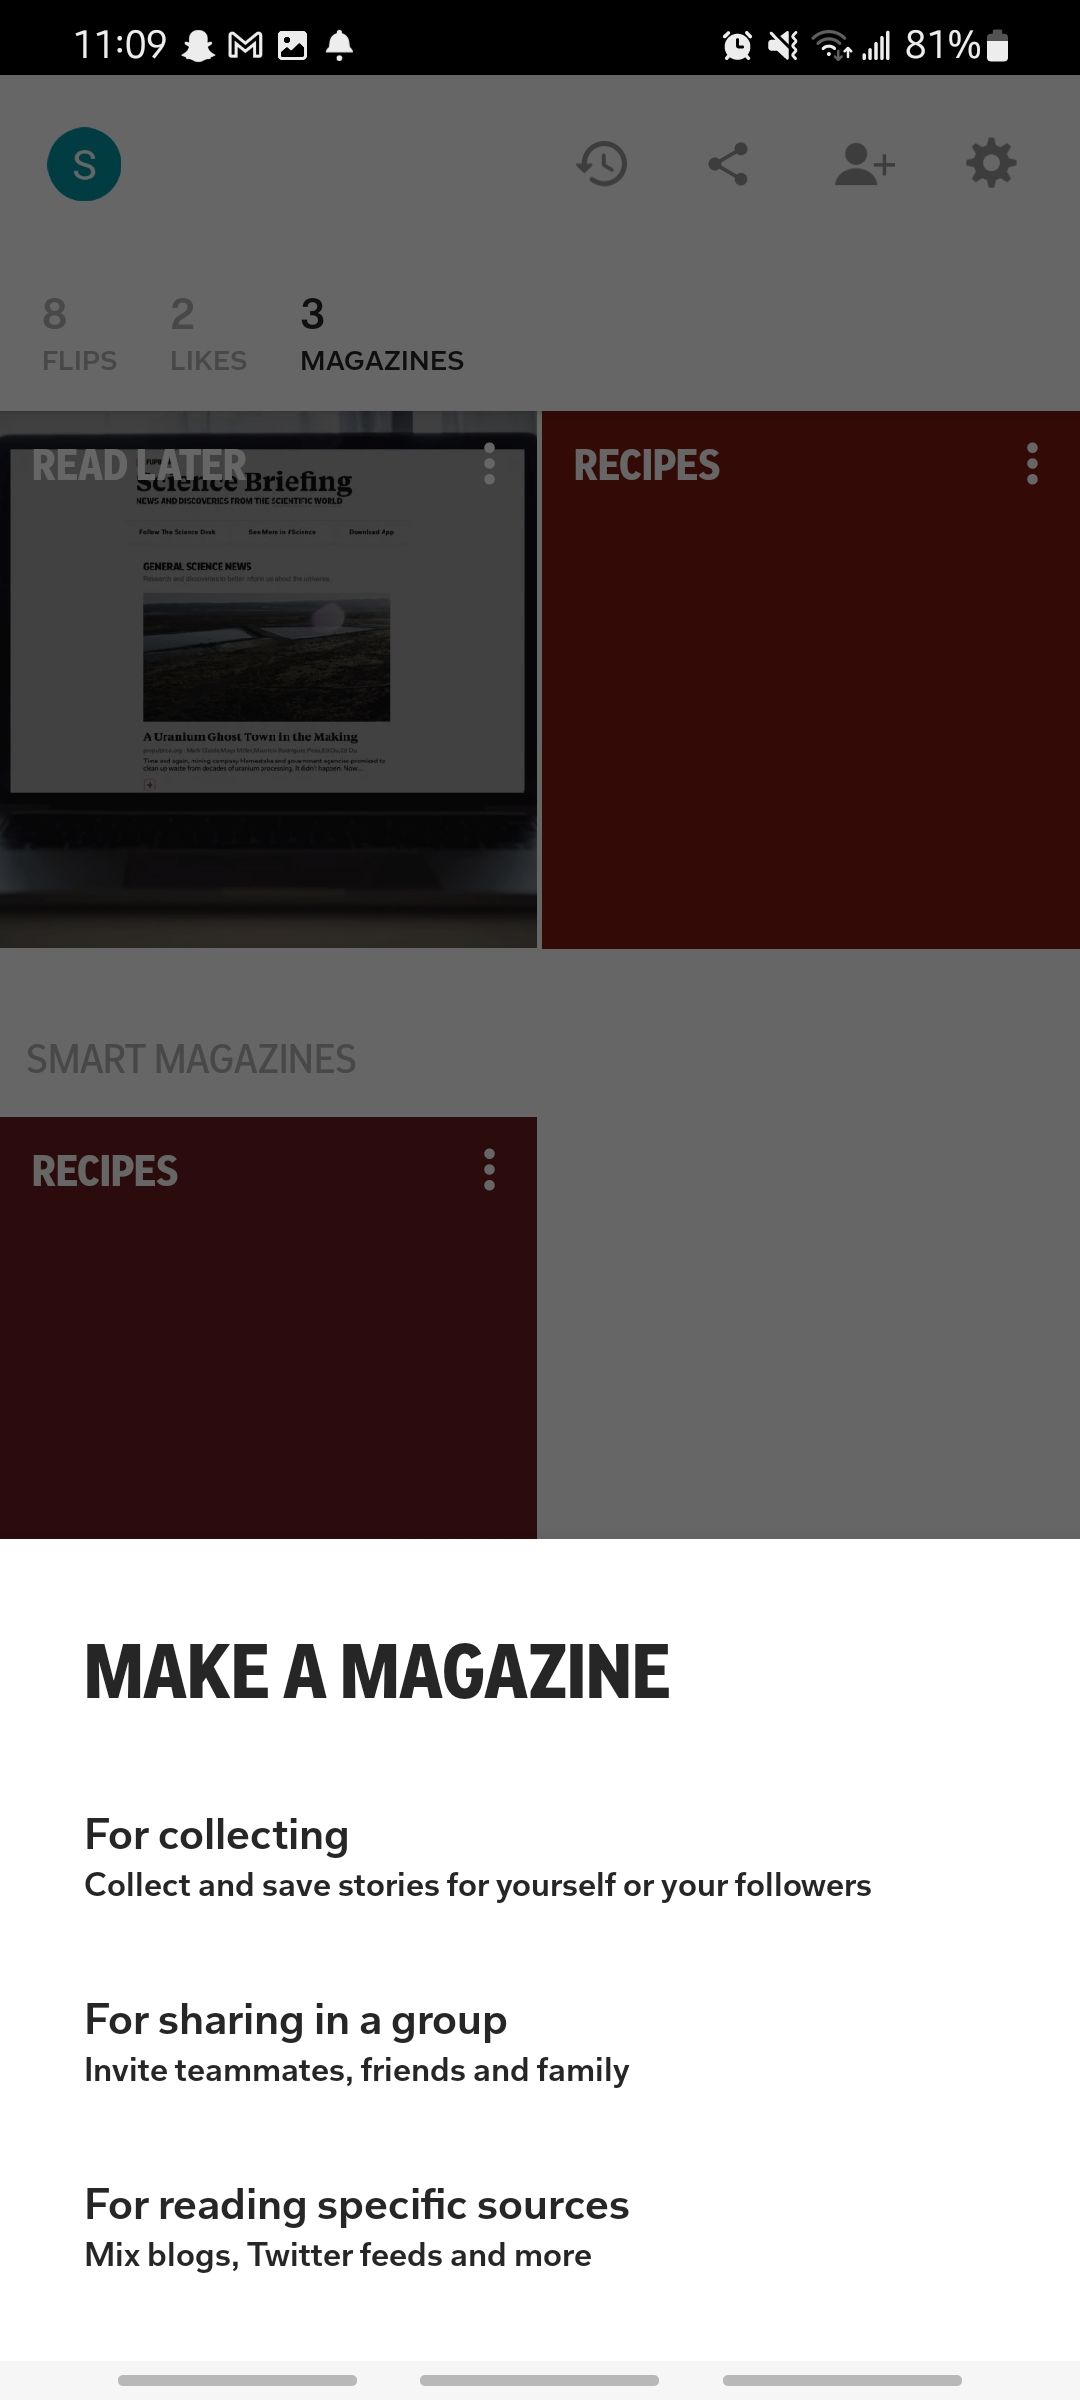 flipboard magazines for collecting, sharing in a group, or reading specific sources